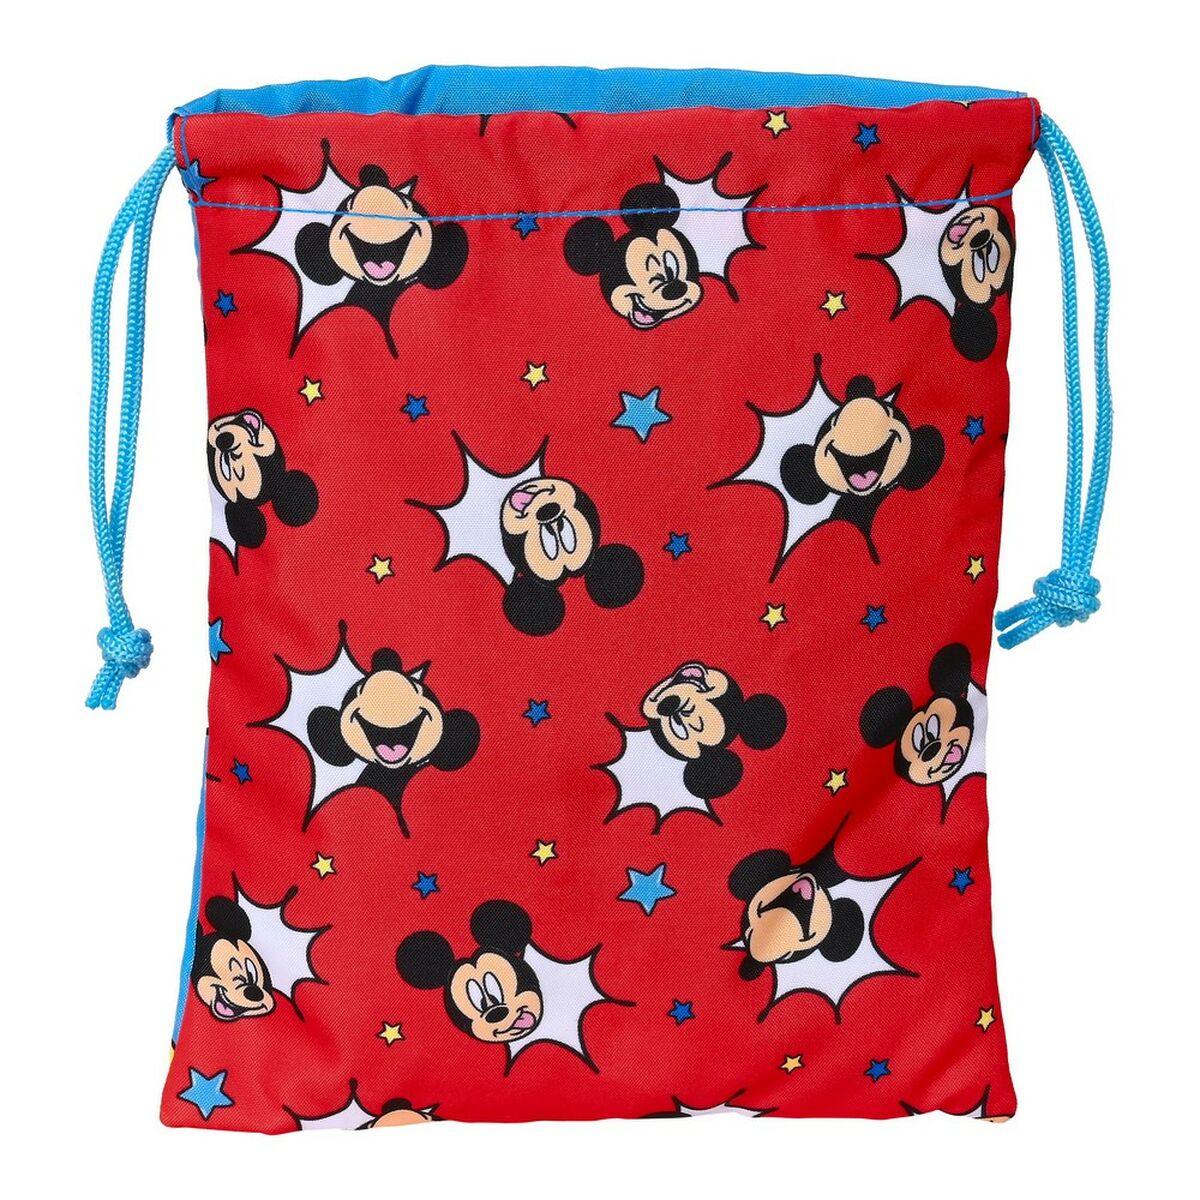 Lunchbox Mickey Mouse Clubhouse Happy Smiles Red Blue (20 x 25 x 2 cm) - VirtuousWares:Global